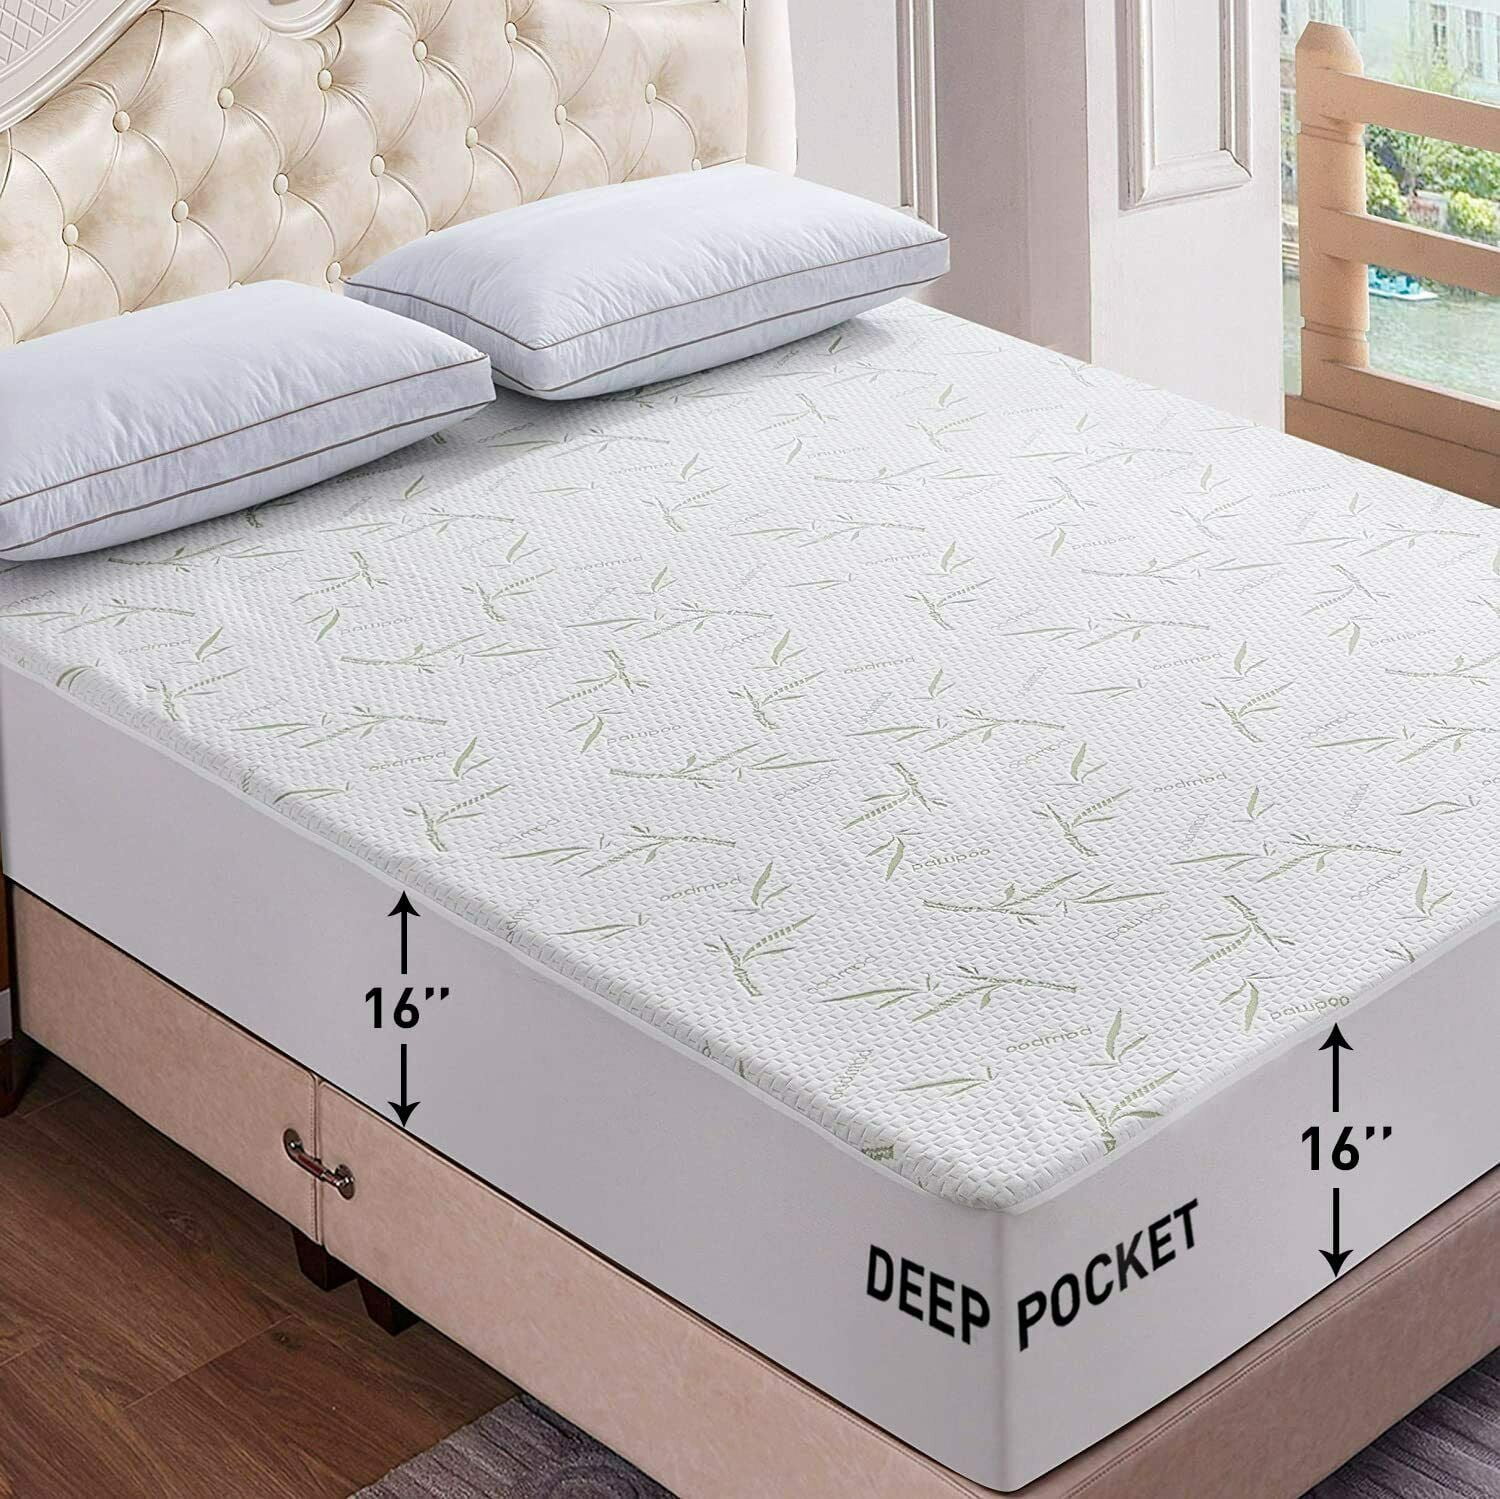 Details about   Mattress Protector Cover Pad Topper Fit Up to 16" Bed Queen King Size Waterproof 